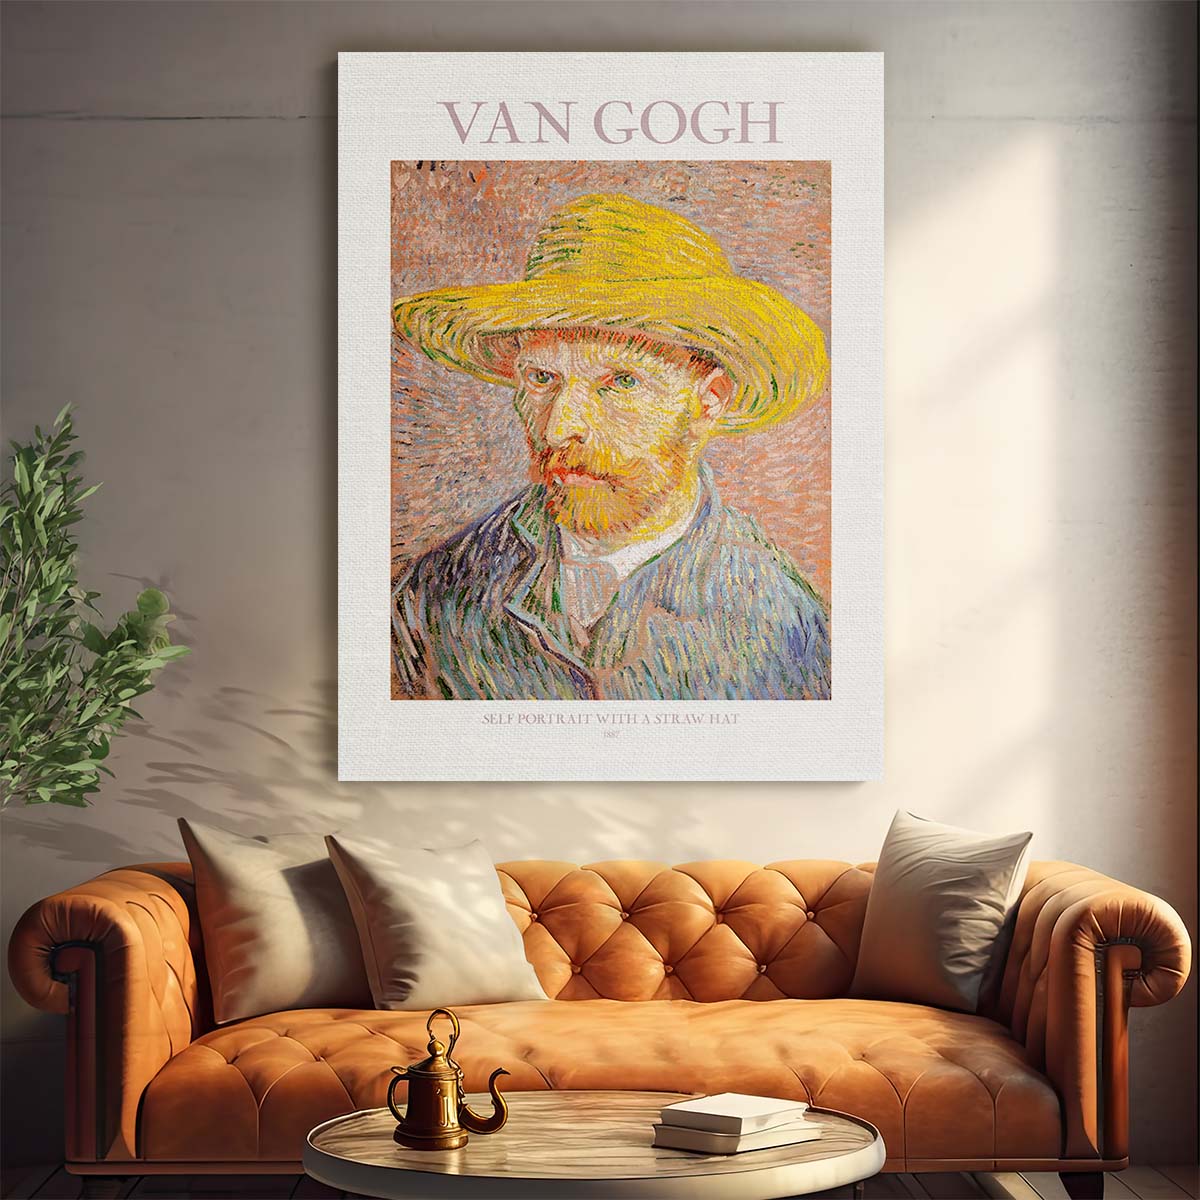 Van Gogh Self-Portrait with Straw Hat, Master Oil Painting Illustration by Luxuriance Designs, made in USA